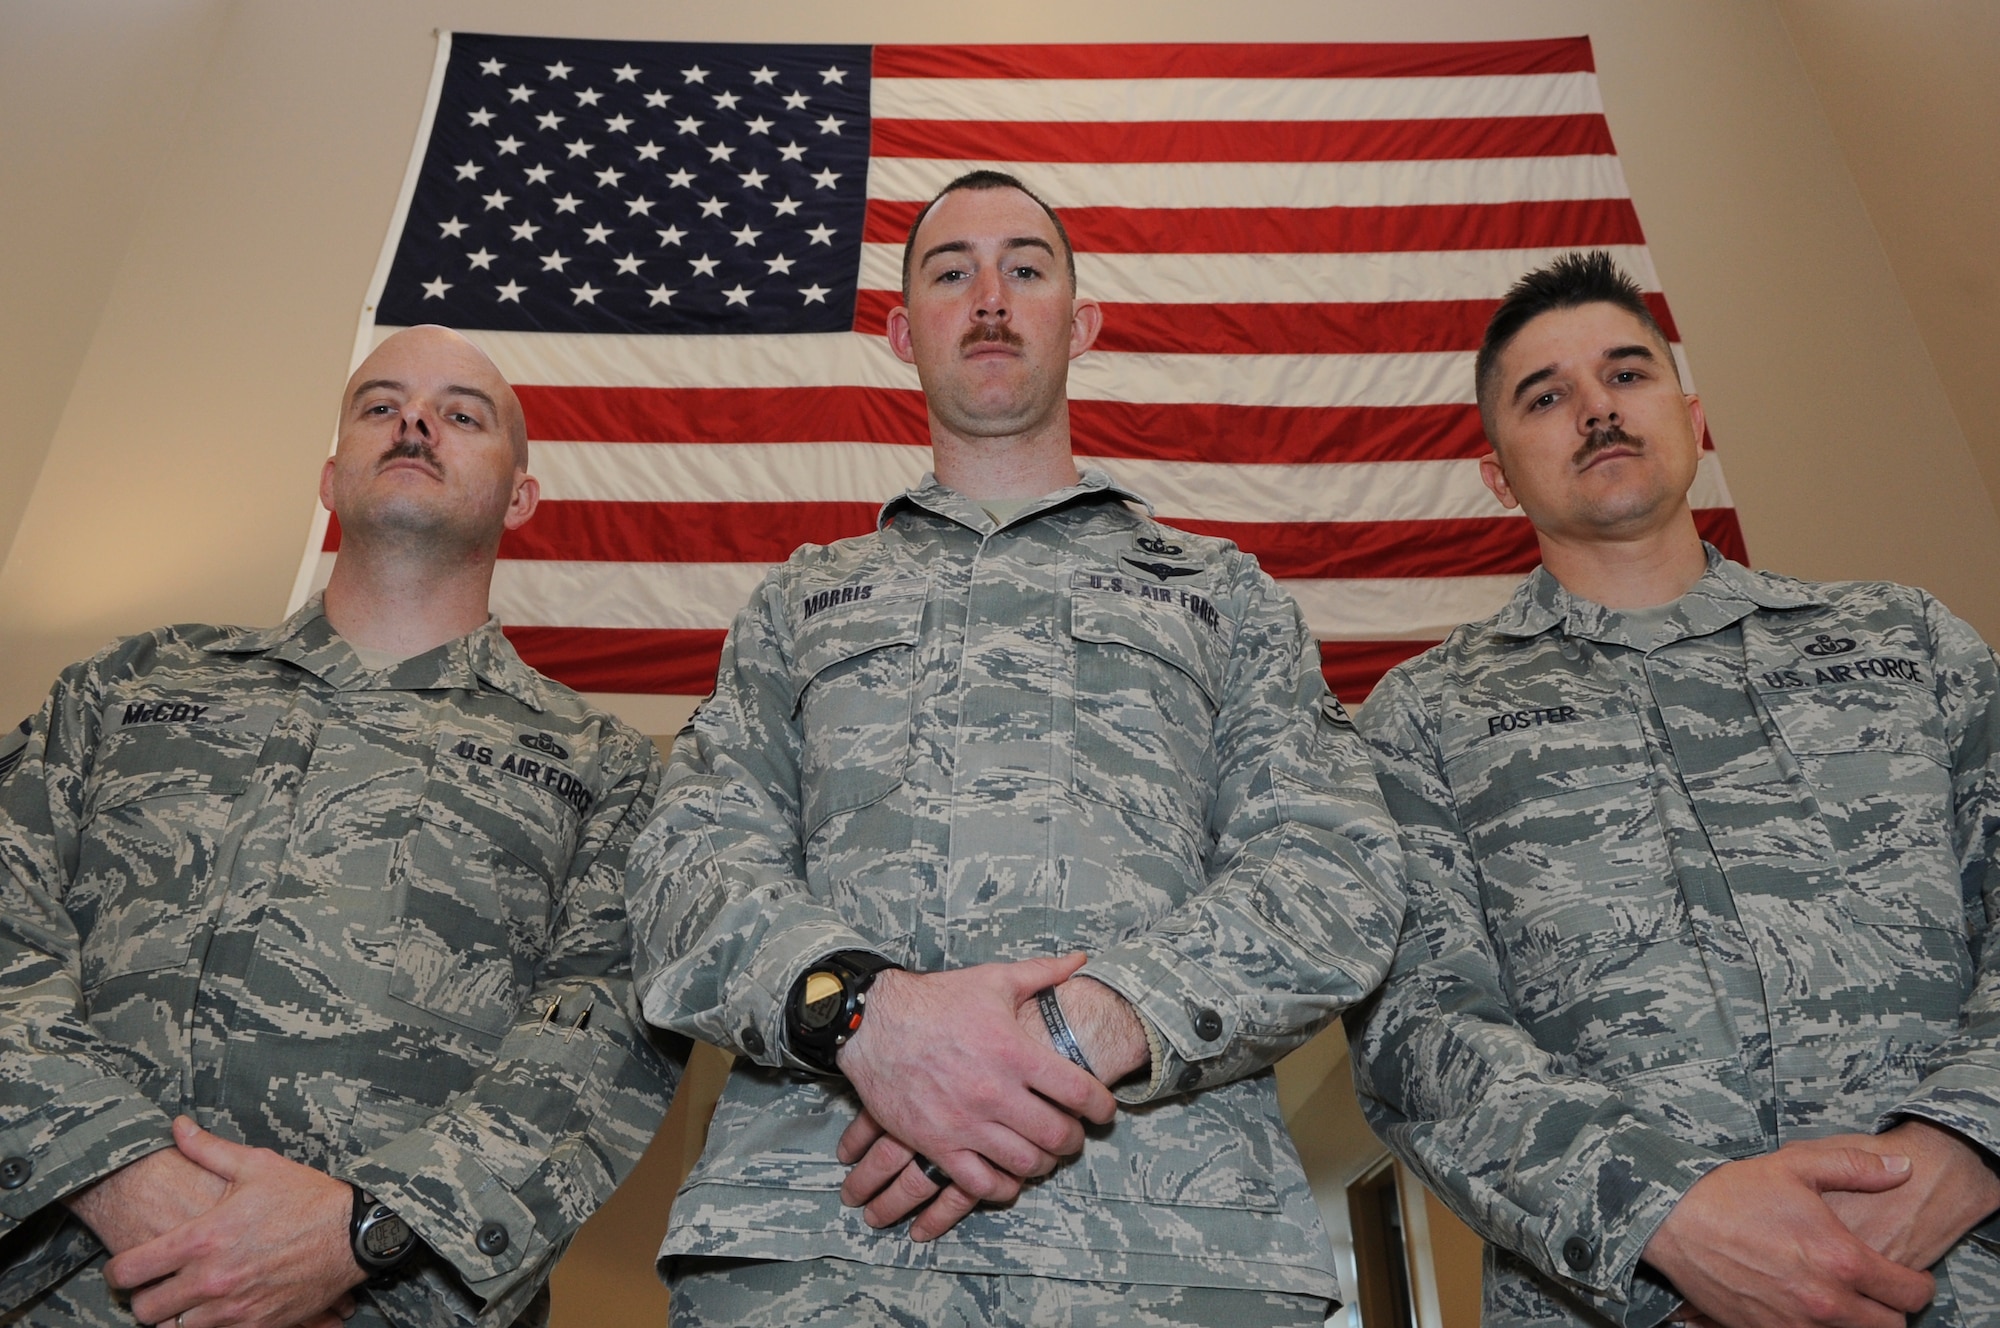 Master Sgt. Bryan McCoy, Staff Sgt. Clayton Morris, and Master Sgt. Anthony Foster from 436th Operational Support Squadron aircrew flight equipment section show off their whiskers that were grown for Mustache March, March 27, 2014, at Dover Air Force Base, Del. Gen. Mark A. Welsh III, Air Force Chief of Staff, recently laid down an Air Force-wide Mustache March challenge. (U.S. Air Force photo/Airman 1st Class Zachary Cacicia)